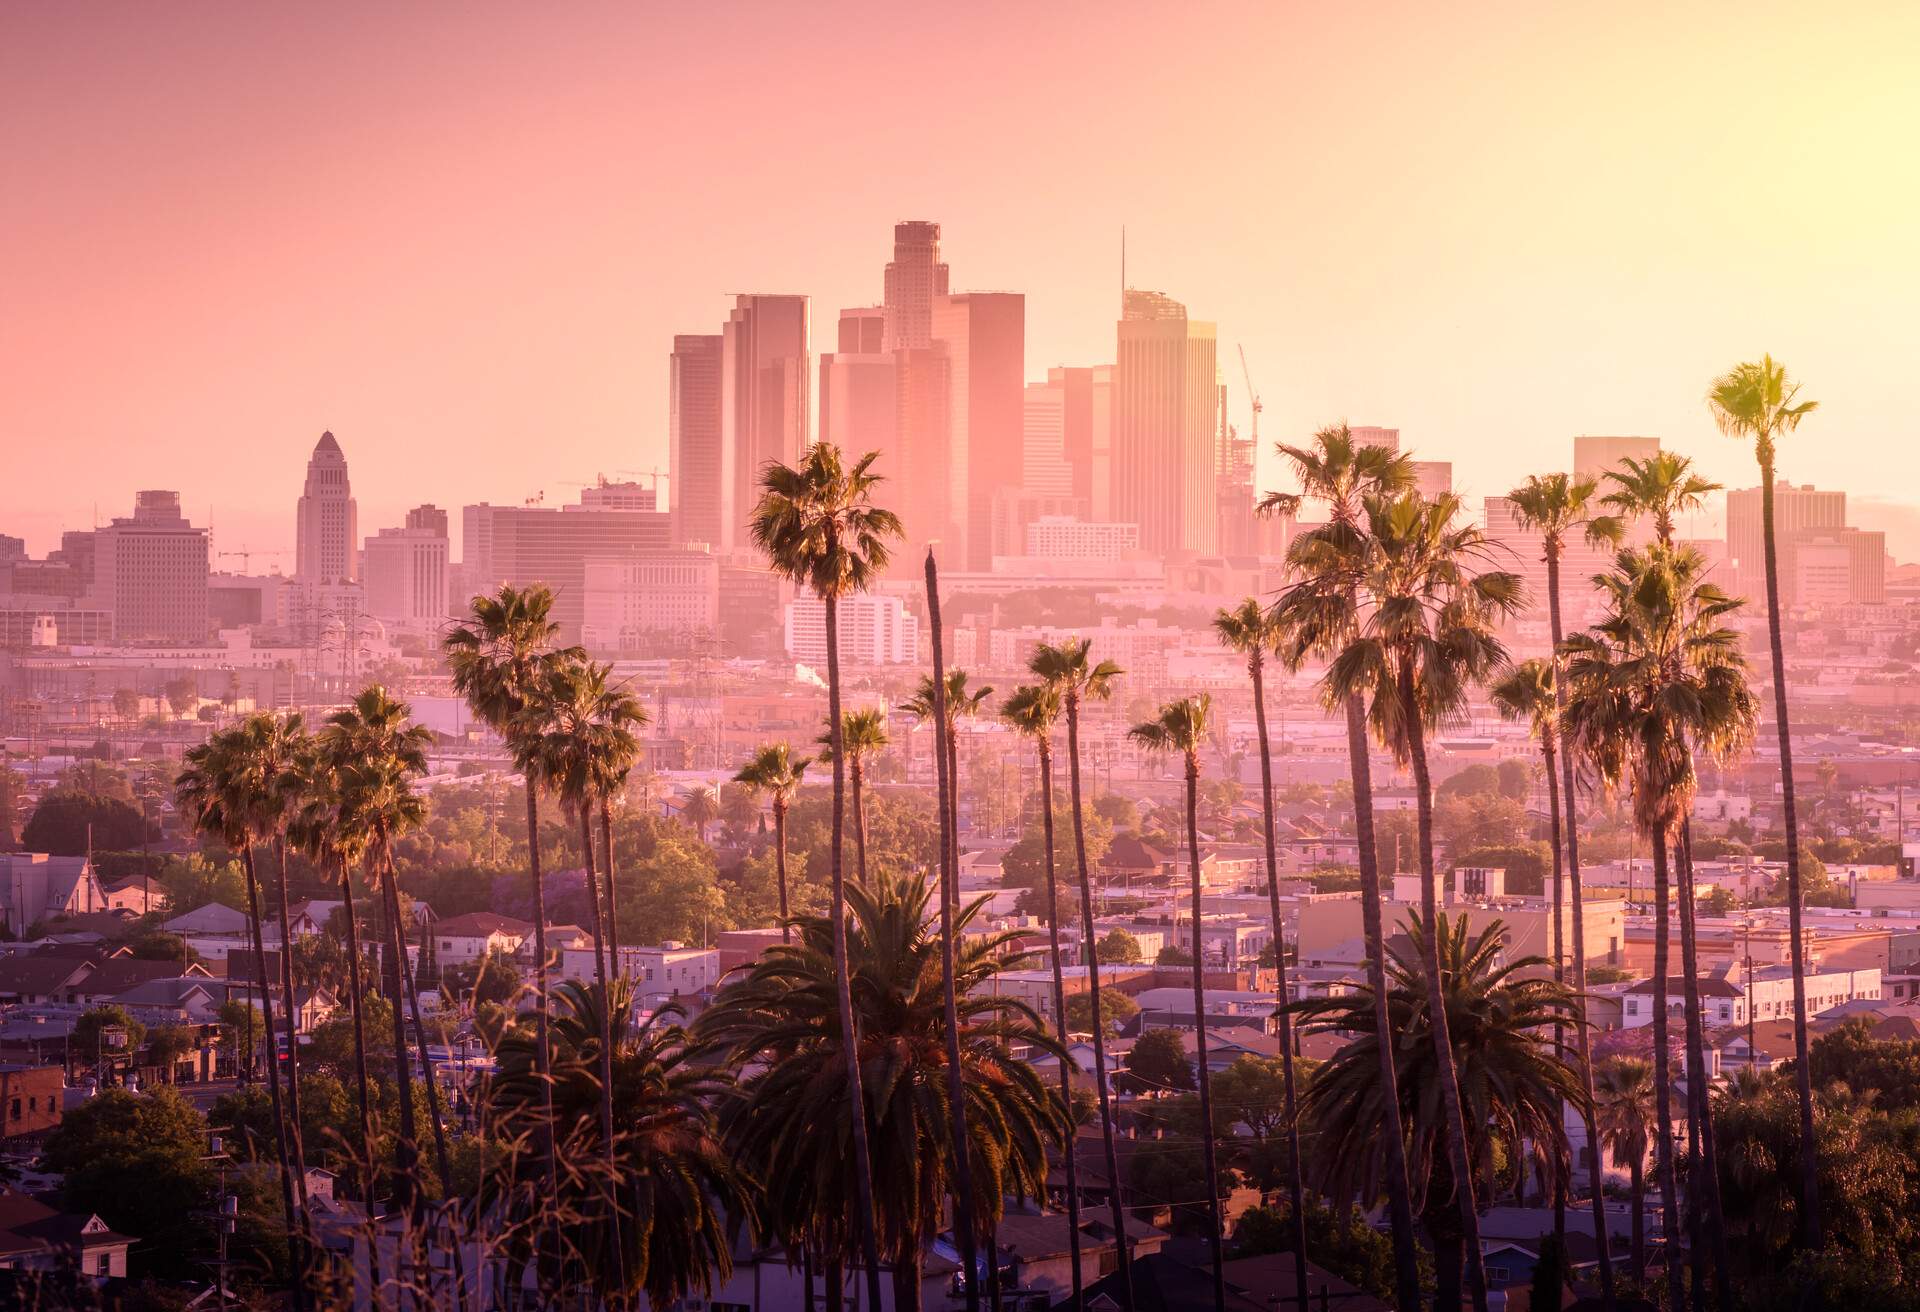 DEST_USA_CALIFORNIA_LOS-ANGELES_SKYLINE_SUNSET_PALM-TREES_TONED_GettyImages-802758686